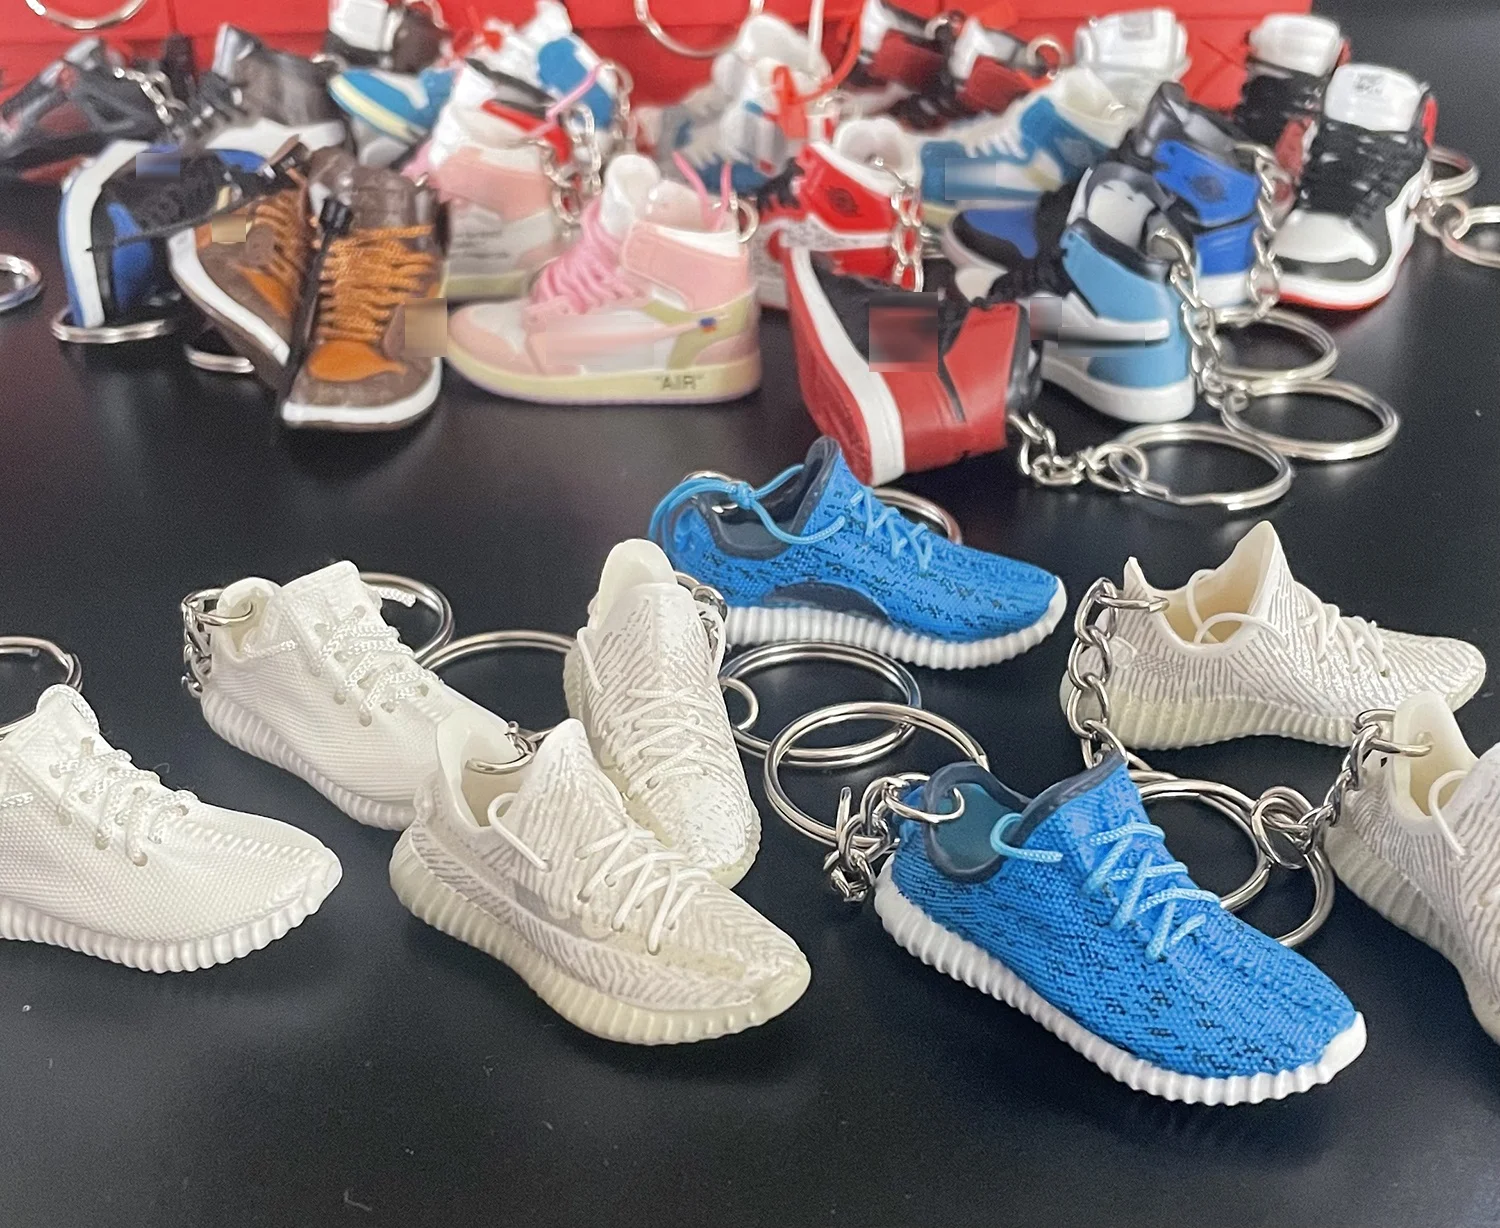 Will I find the Gold Sneakers? #minibrandssneakers #minisneakers #snea, mini  brand sneakers